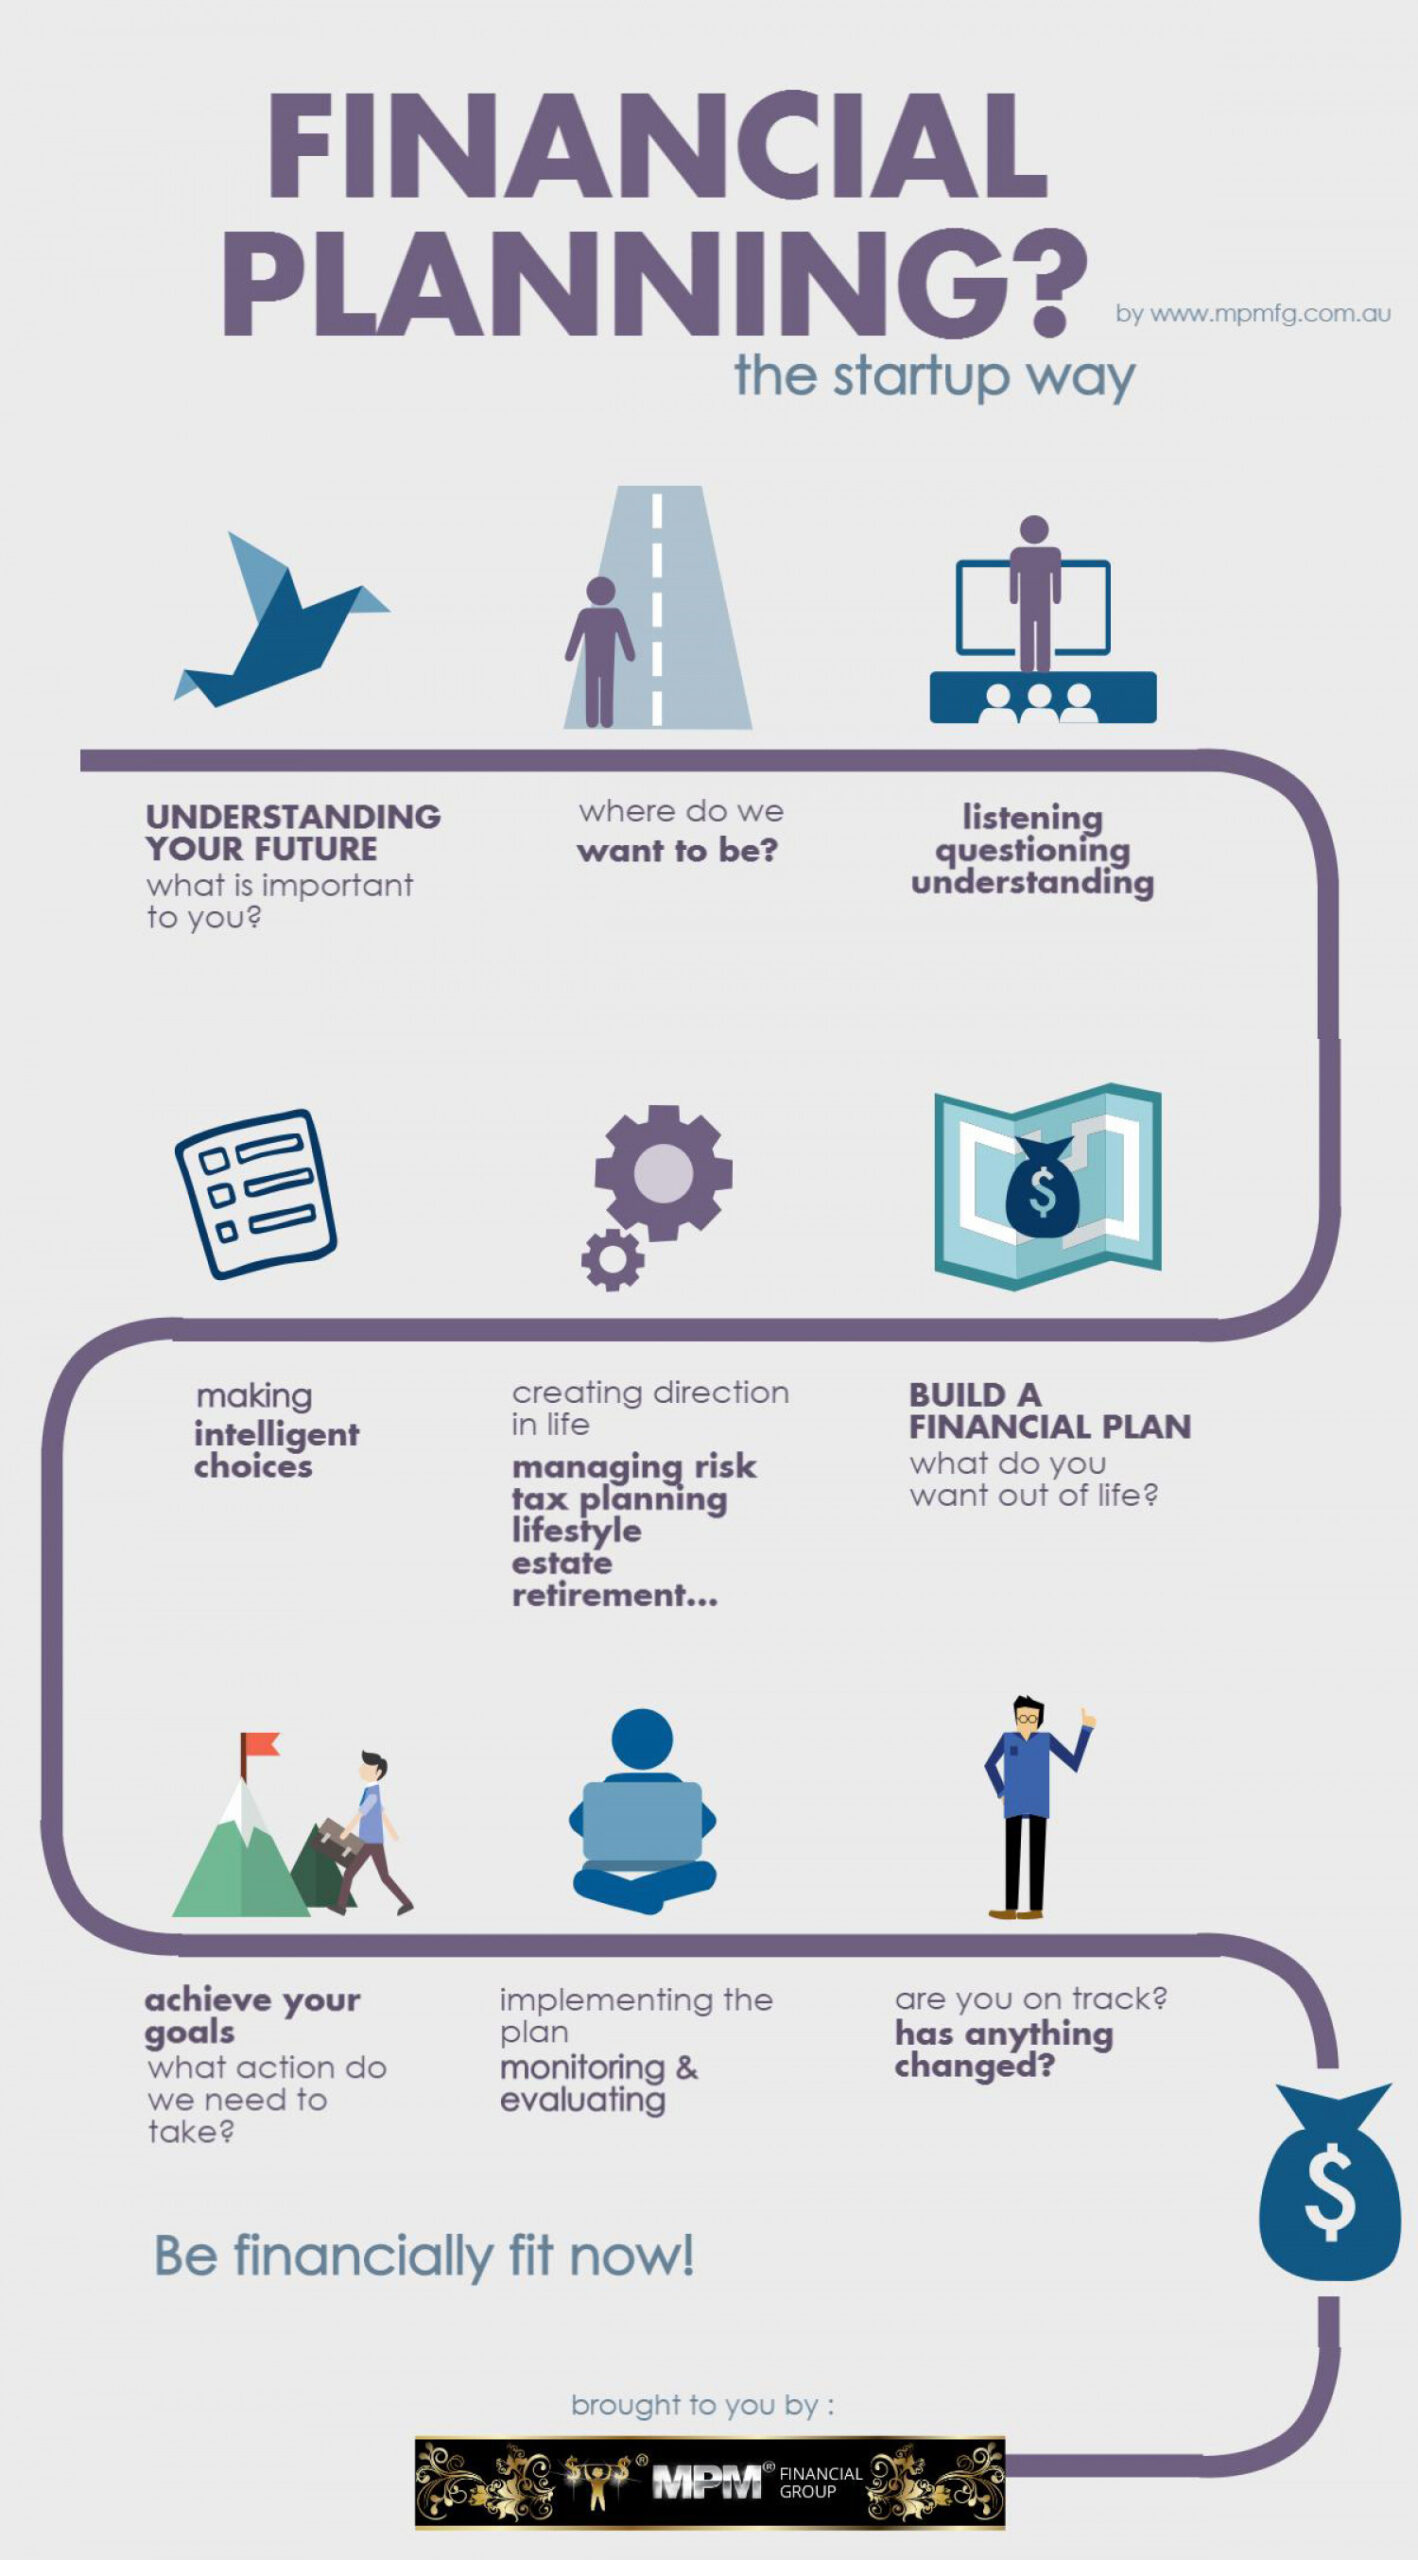 The journey of event planning in the UK - an infographic